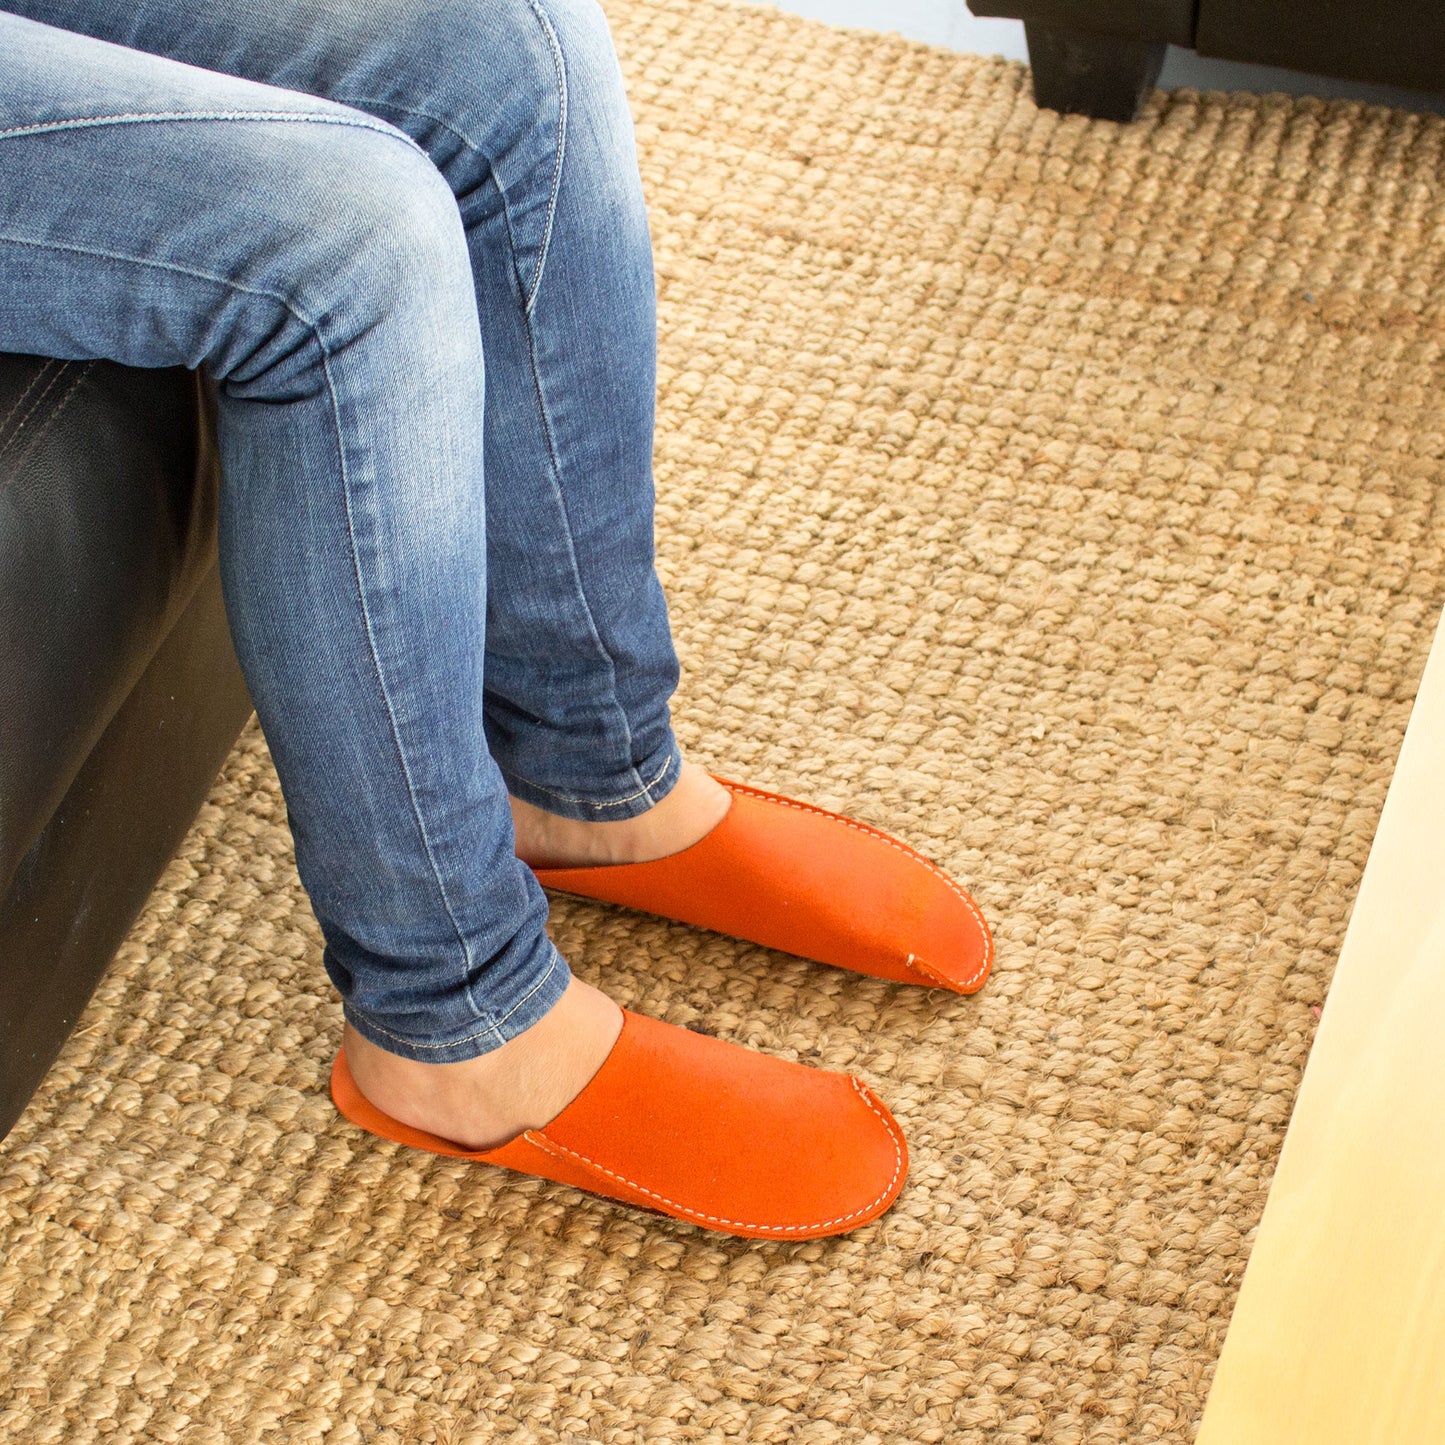 Orange CP Slippers minimalist for man and woman home shoes